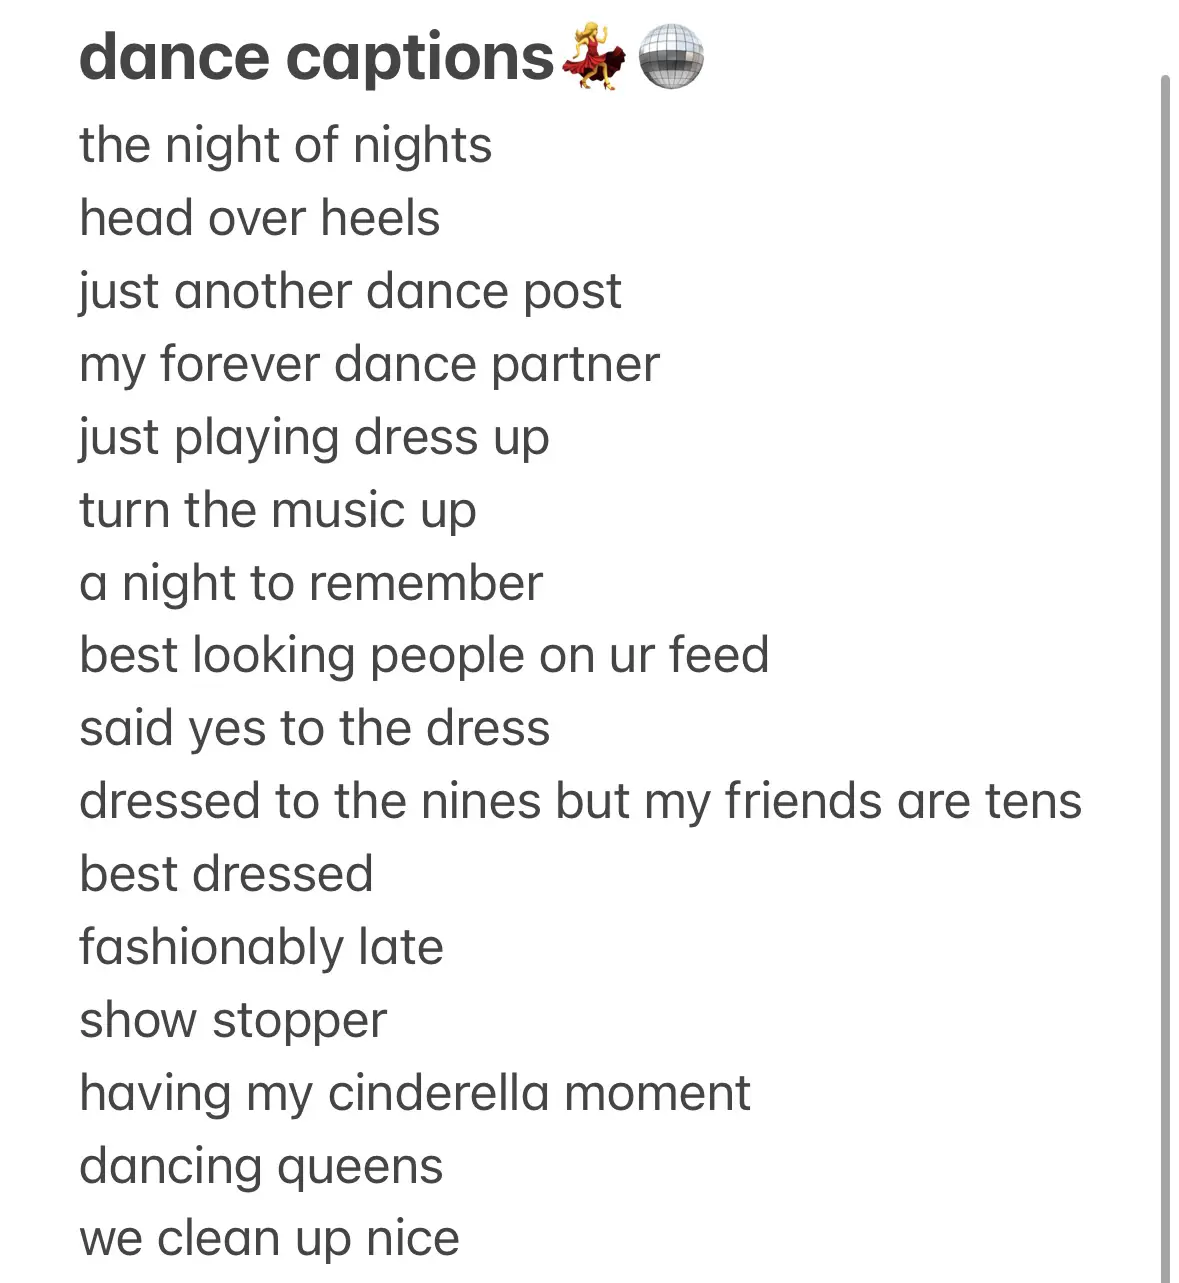  A list of dance posts with a caption that says " Dance Captions the night of nights head over heels just another dance post my forever dance partner just playing dress up".